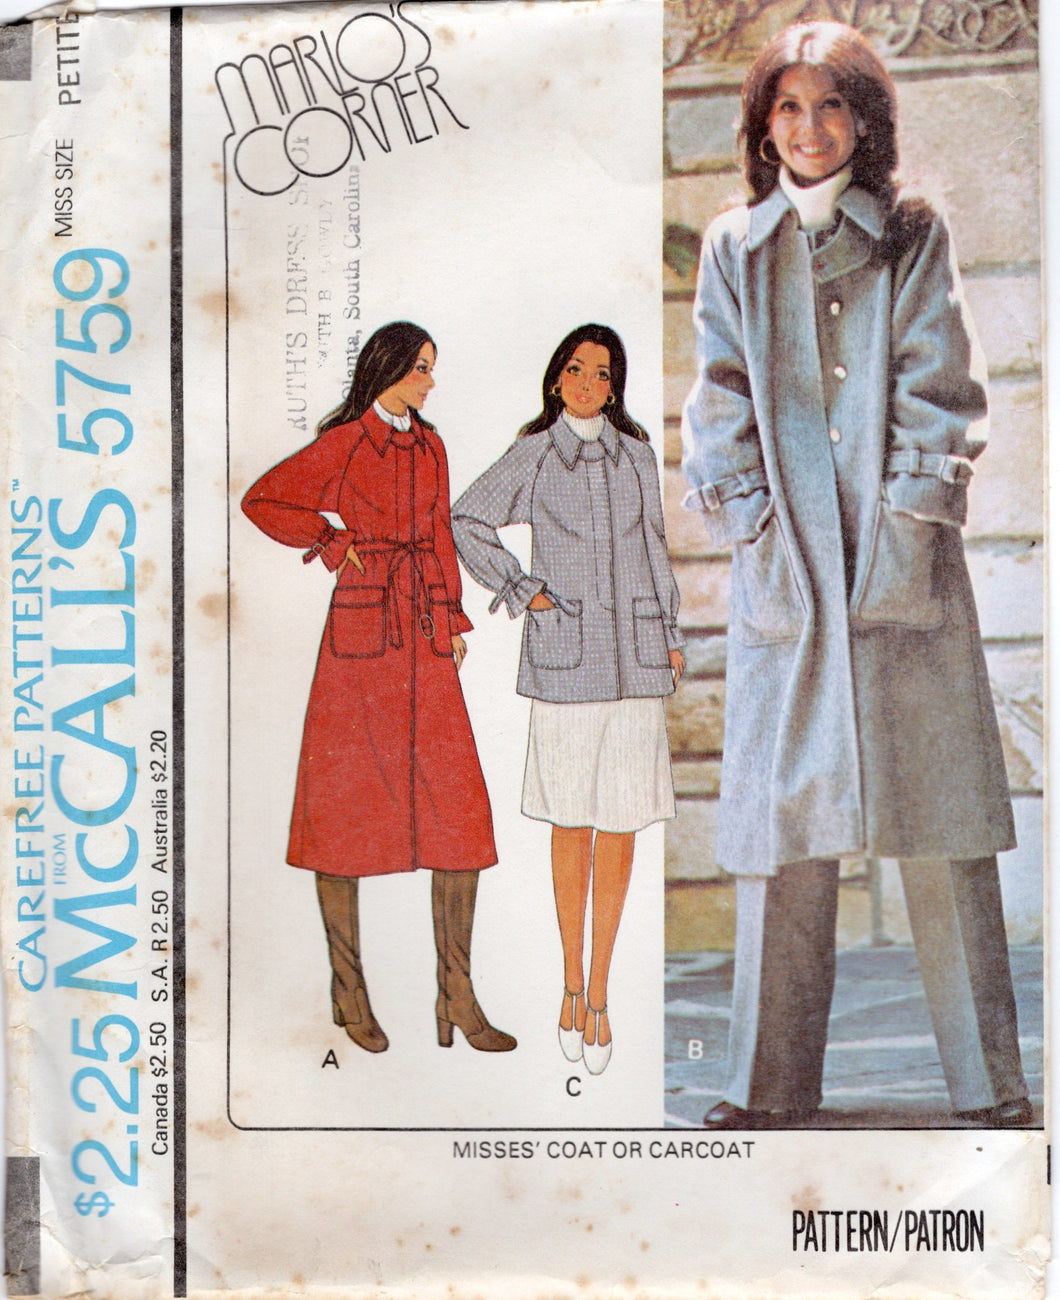 1970's McCall's Marlo's Corner Coat or Carcoat with raglan sleeves pattern - Bust 30.5-46